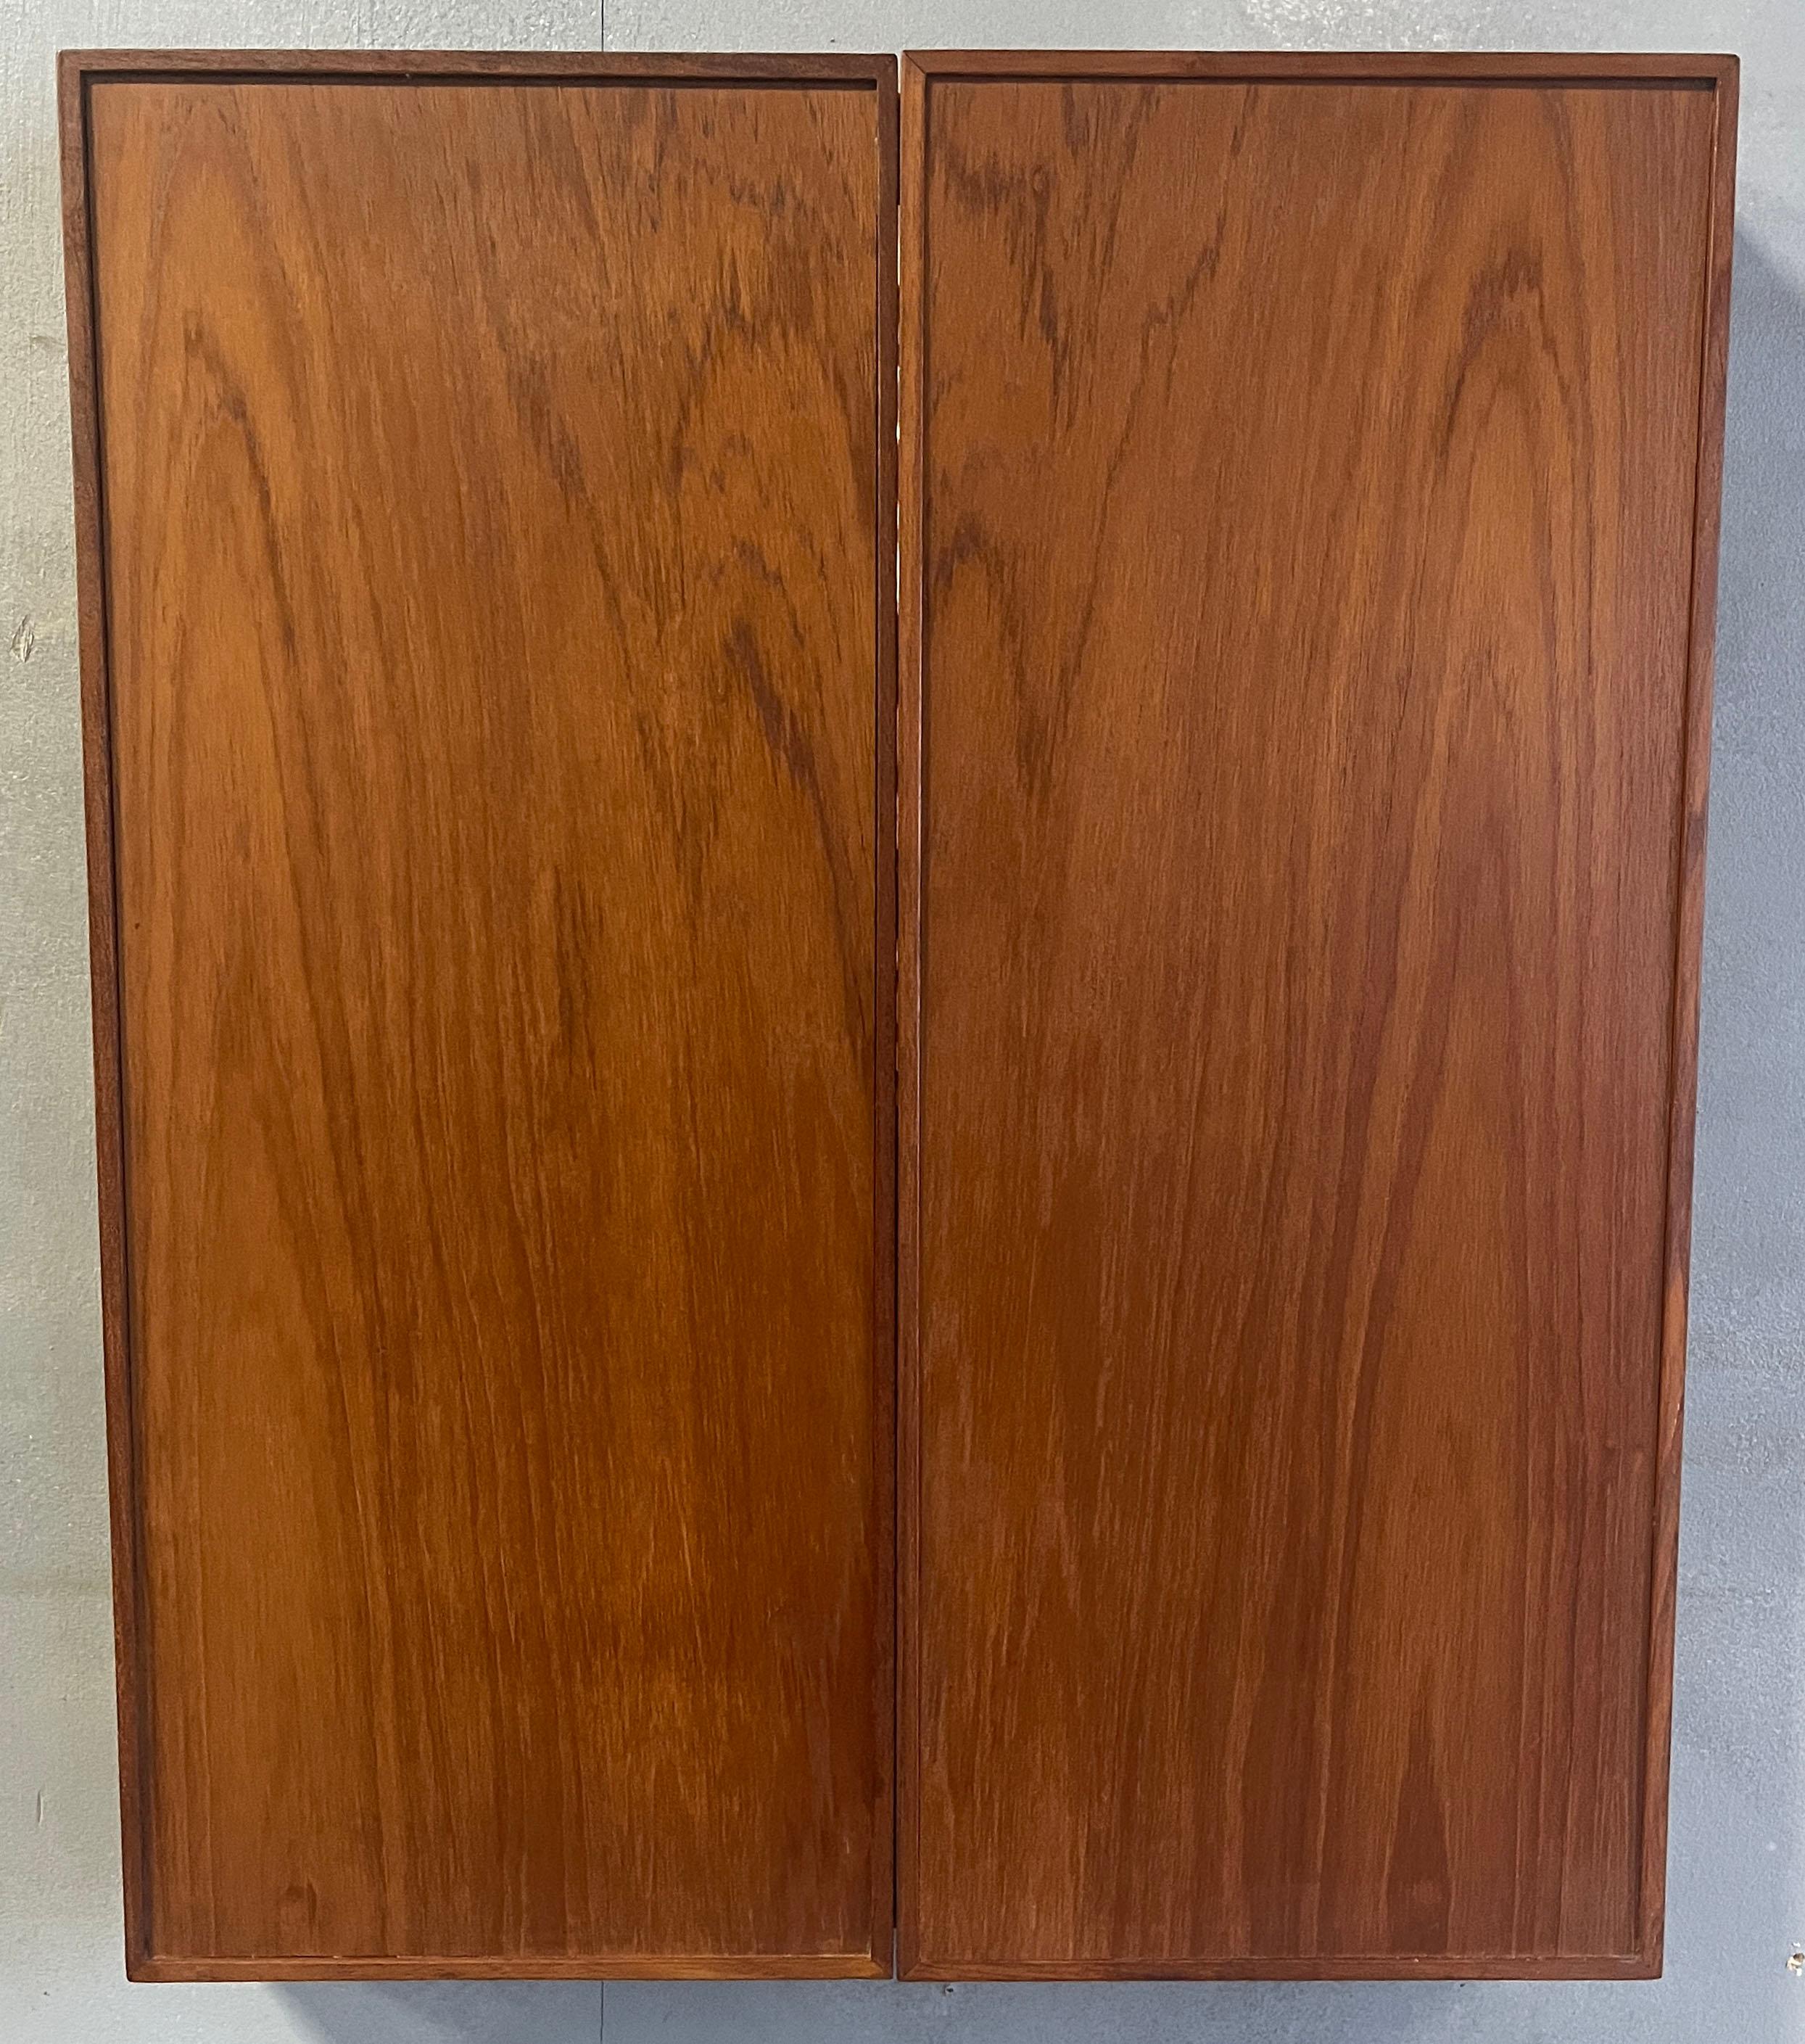 Folding tri-fold / triptych tabletop or wall-mounted mirror crafted in teak designed by Kai Kristiansen for Aksel Kjersgaard (circa 1960s, Denmark) composed of three hinged-sections (the two end sections can fold in partially or fully). Equipped